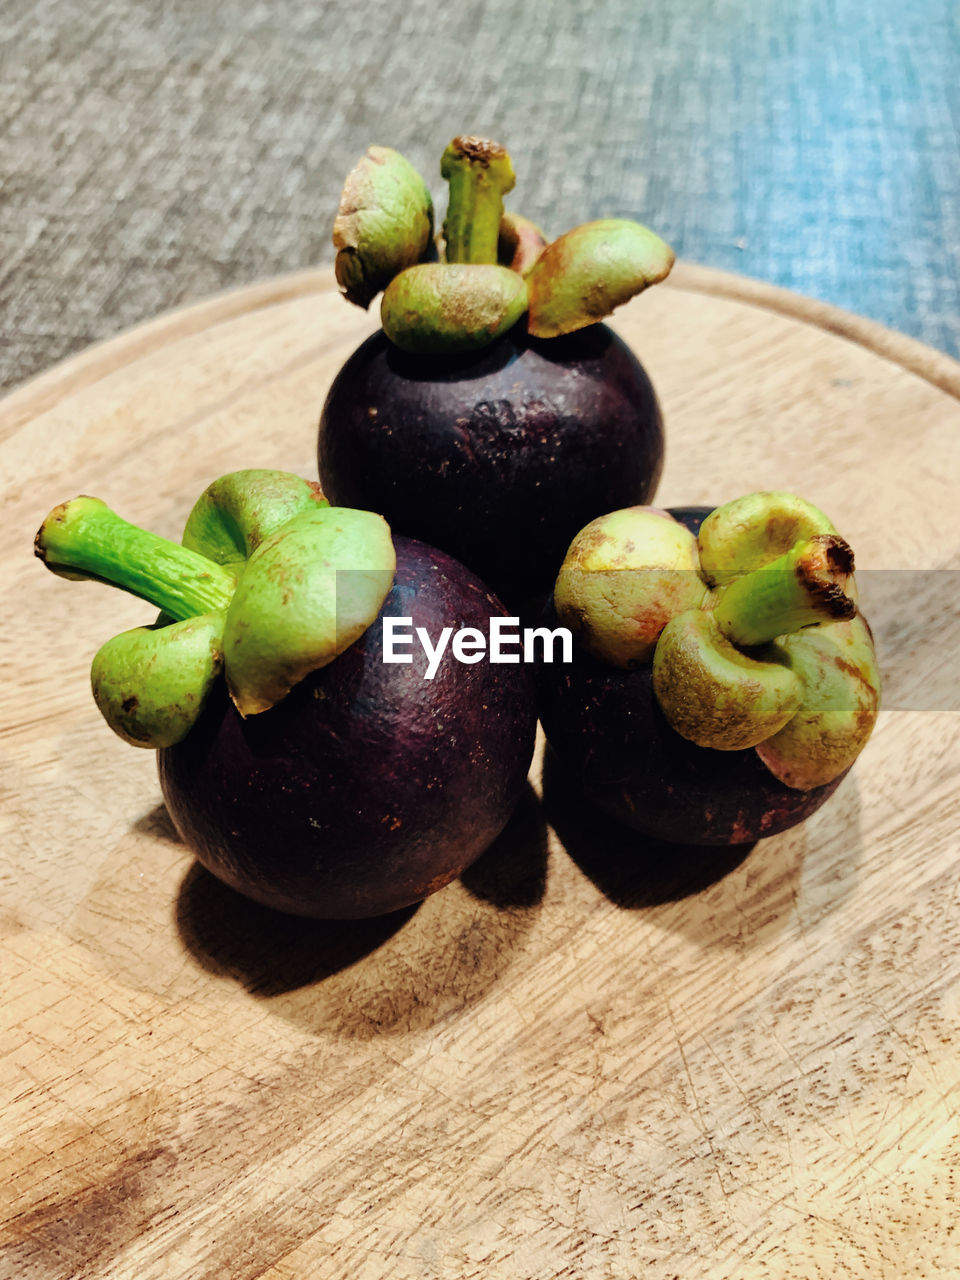 food and drink, food, healthy eating, freshness, wellbeing, fruit, plant, produce, wood, table, green, no people, still life, high angle view, indoors, close-up, common fig, fig